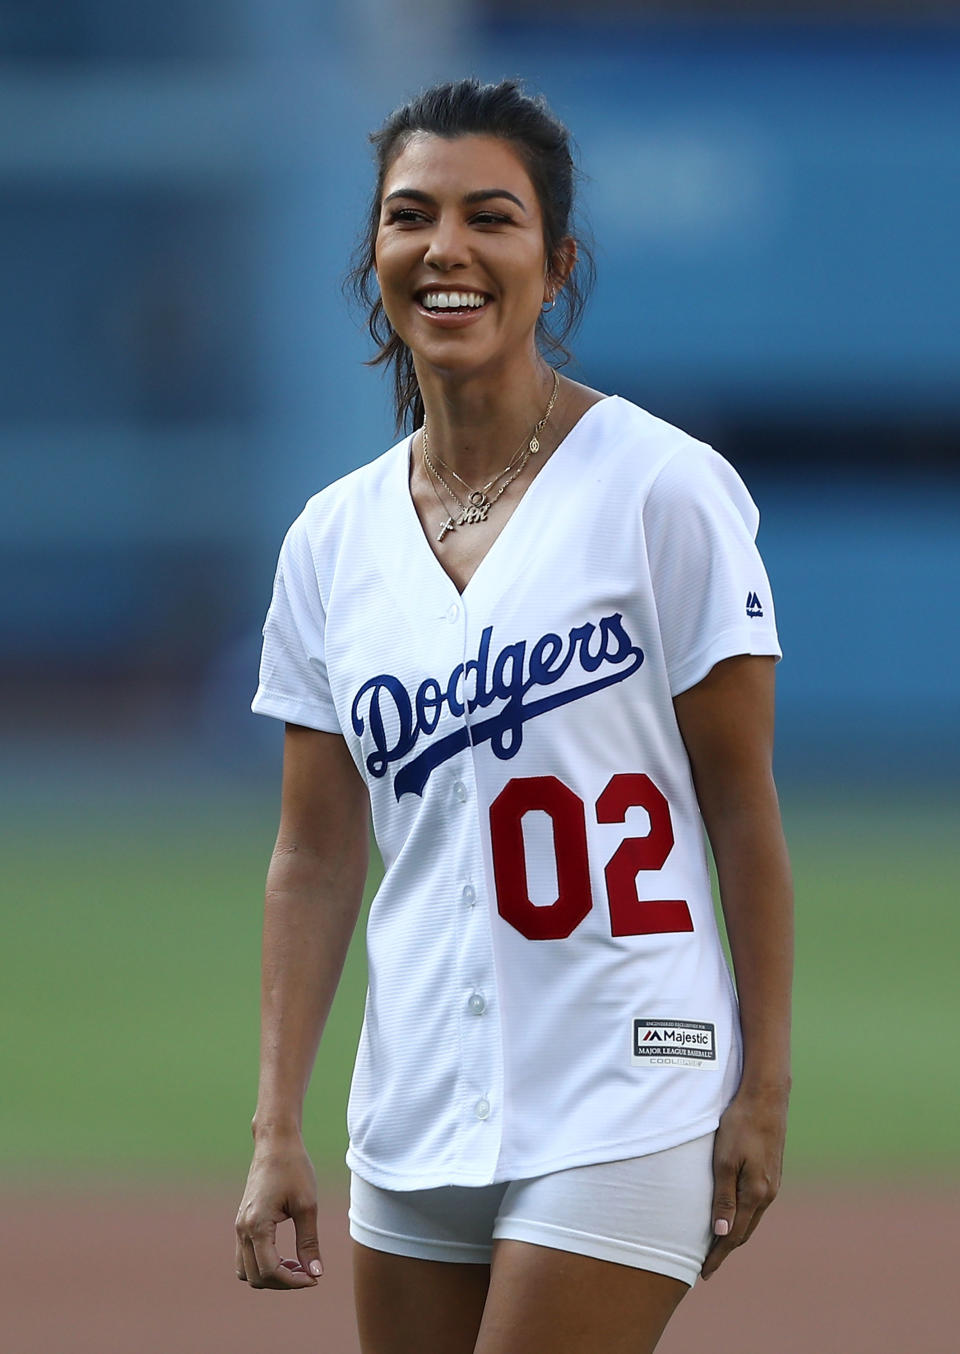 LOS ANGELES, CA - AUGUST 02:  Kourtney Kardashian looks on after throwing out the ceremonial first pitch prior to the MLB game at Dodger Stadium on August 2, 2018 in Los Angeles, California. The Dodgers defeated the Brewers 21-5.  (Photo by Victor Decolongon/Getty Images)